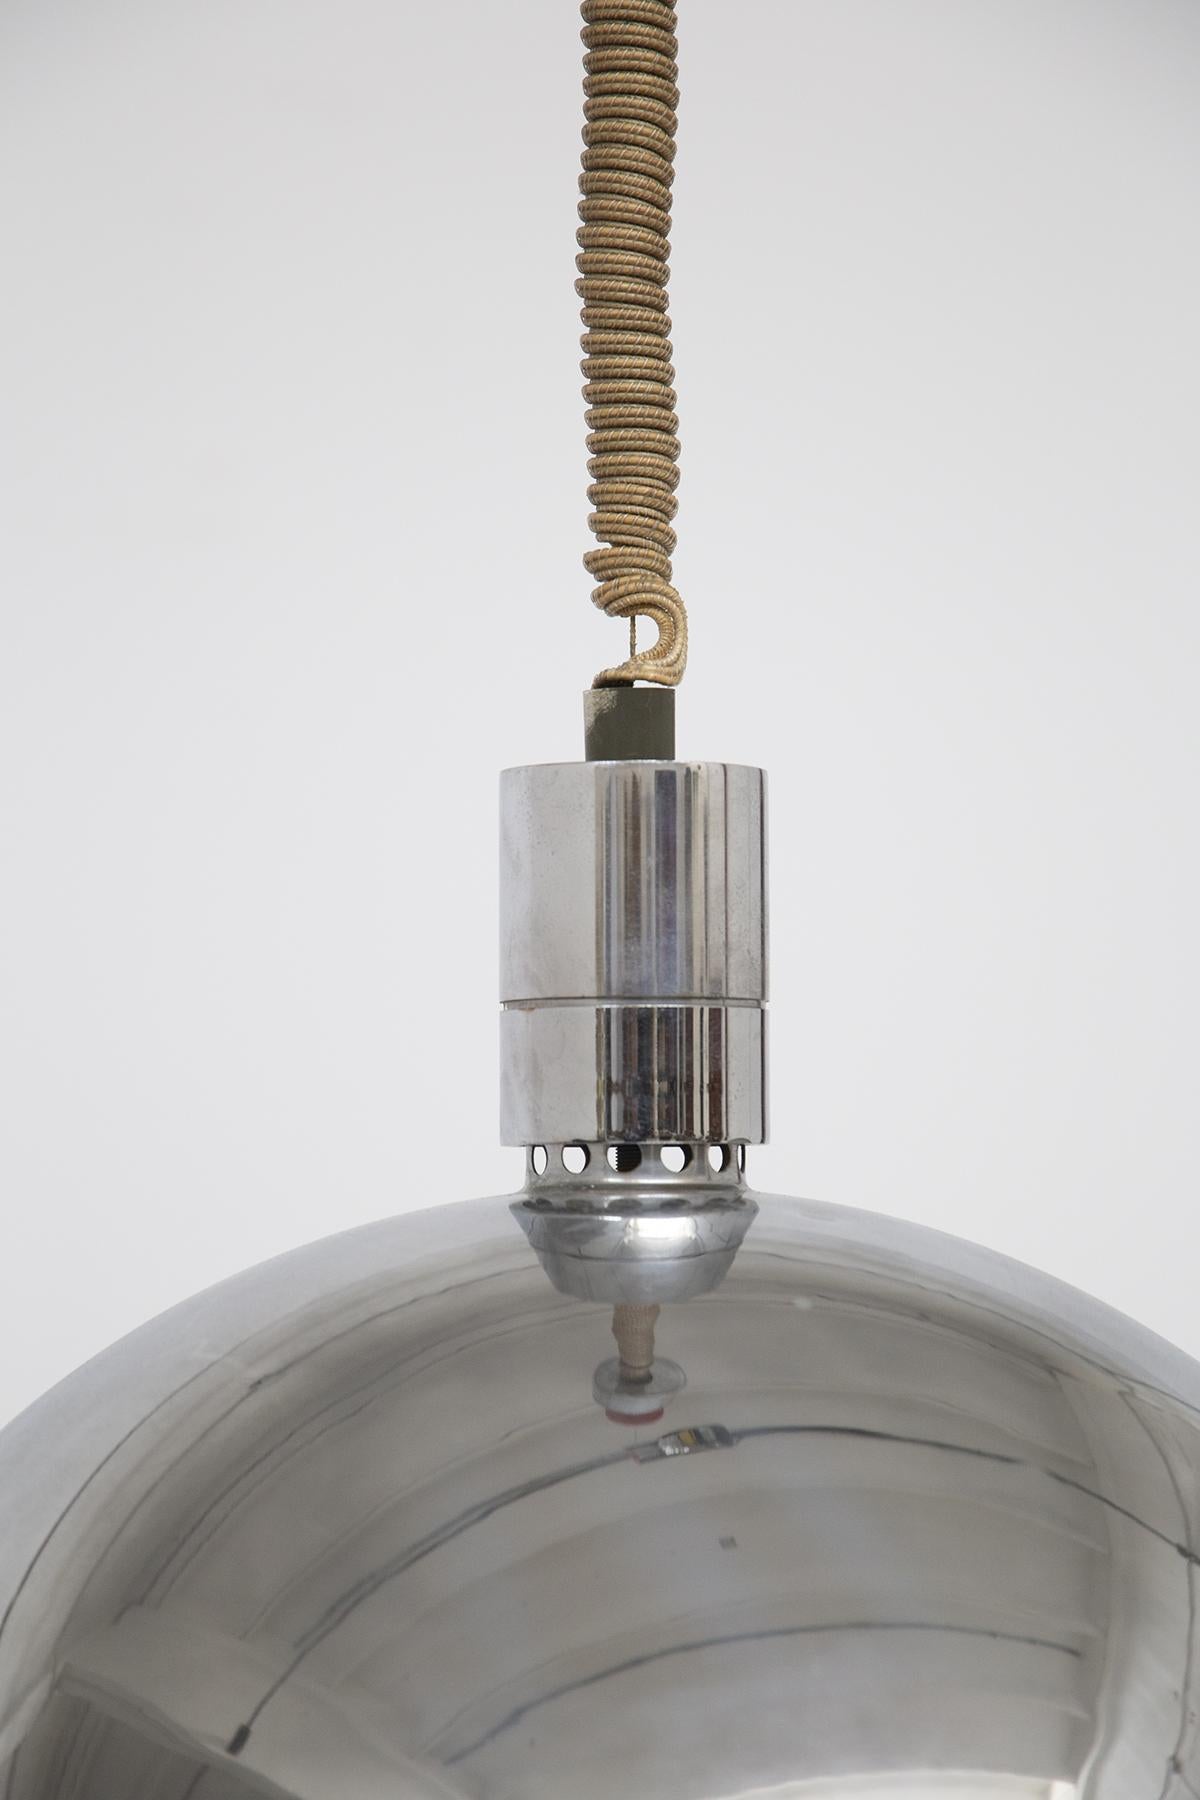 Beautiful ceiling lamp designed by Franco Albini and Franca Helg in the 1950s for the fine Sirrah manufacture. Model AM4Z.
The lamp by Franco Albini is made of totally chromed metal, the hat is a half sphere in polished silver metal. The top is